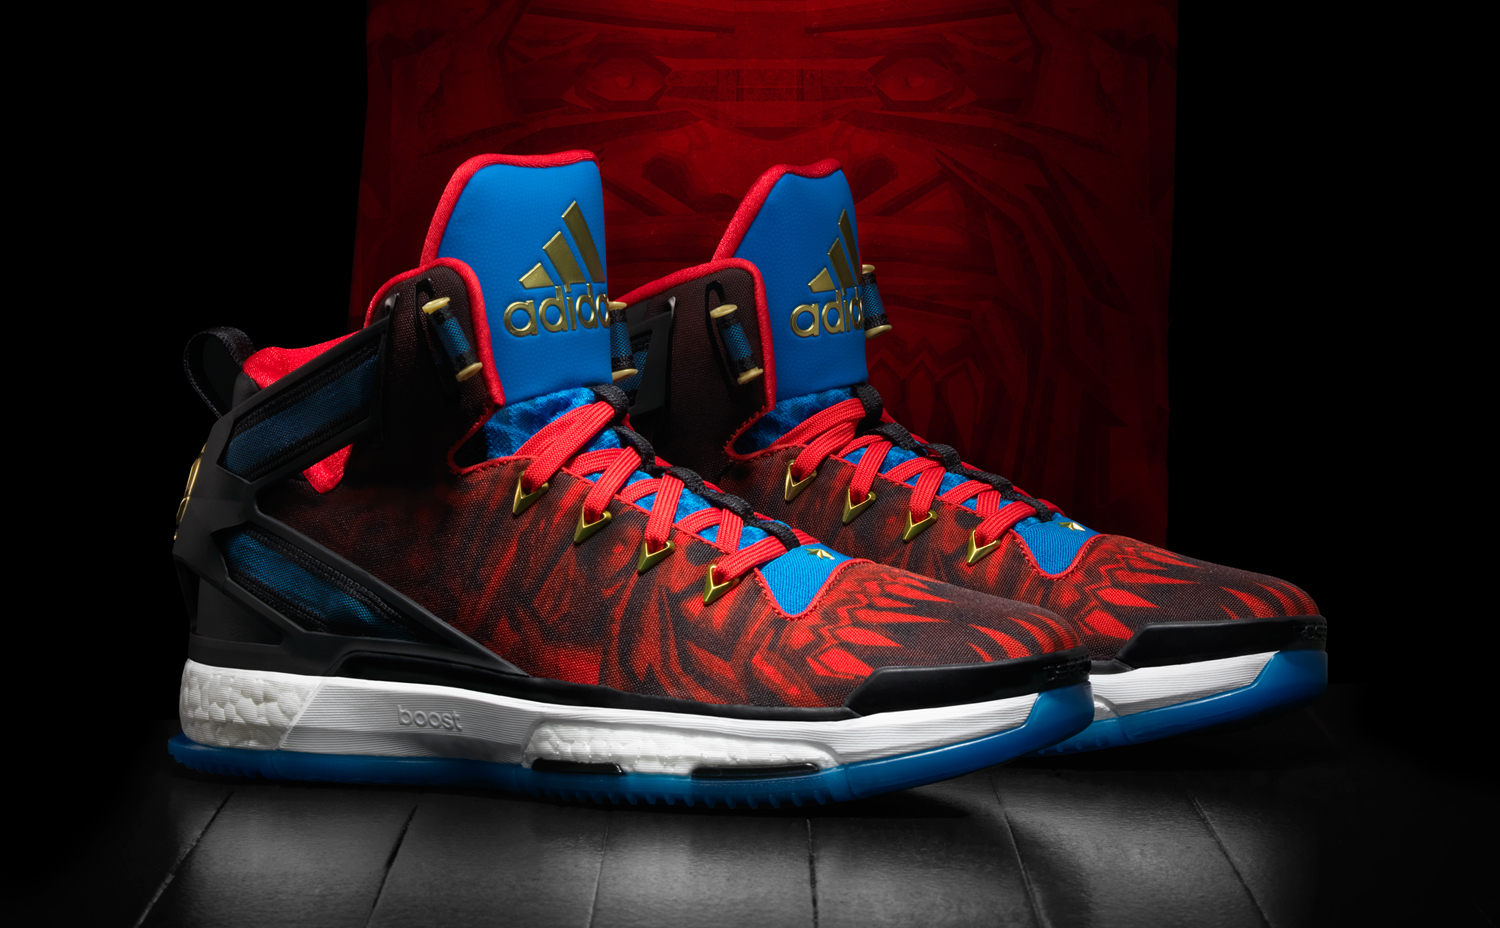 Adidas Basketball Rings in Chinese New Year via 'Fire Monkey' Shoes